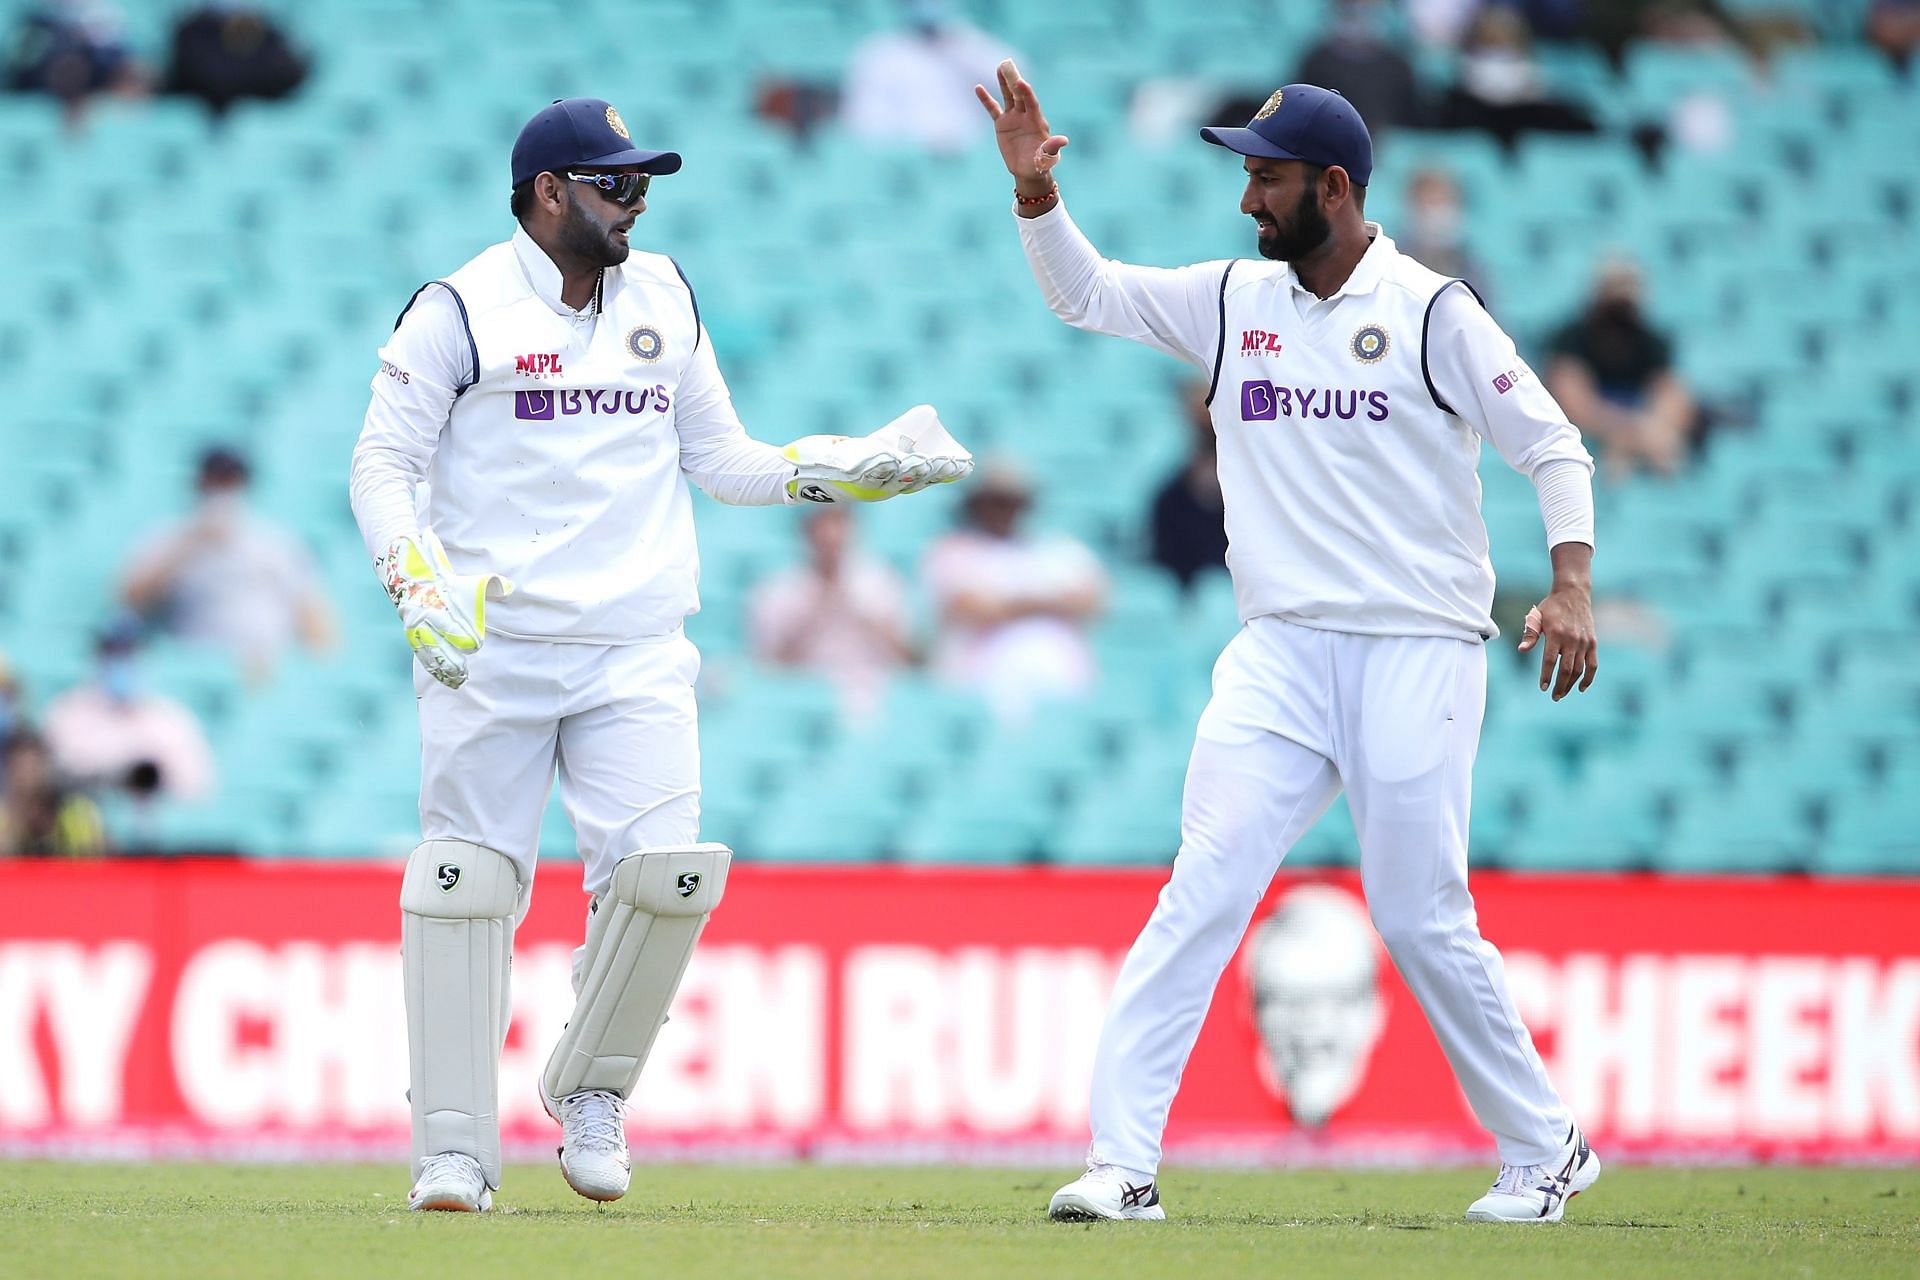 Rishabh Pant (left) and Cheteshwar Pujara have stitched together several memorable partnerships in the past.